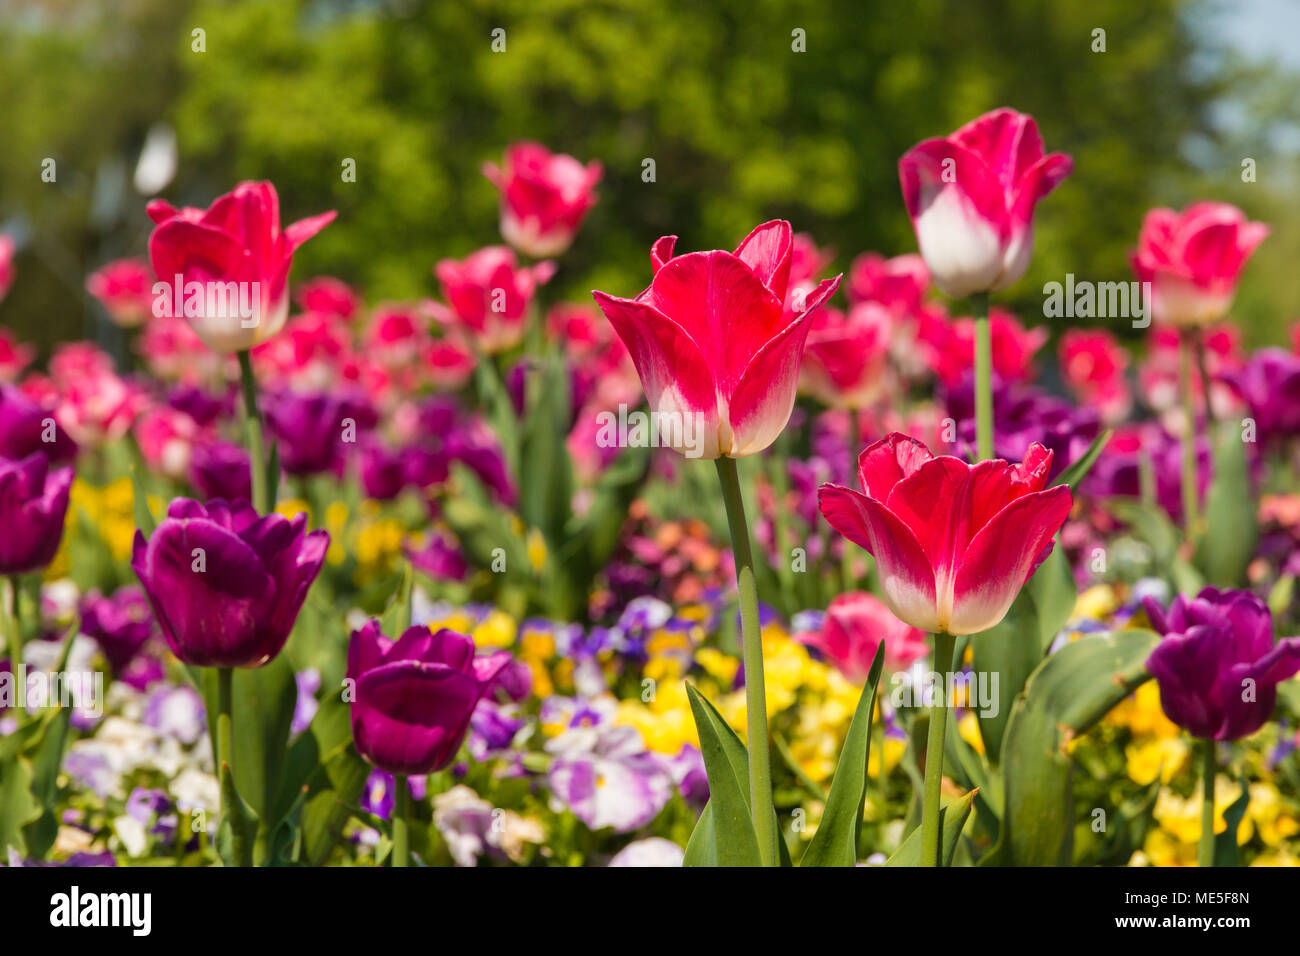 Focused on two pink and white tulips (Tulipa Negrita). The two are surrounded by yellow, white, and purple pansies (Viola) and purple tulips. Stock Photo